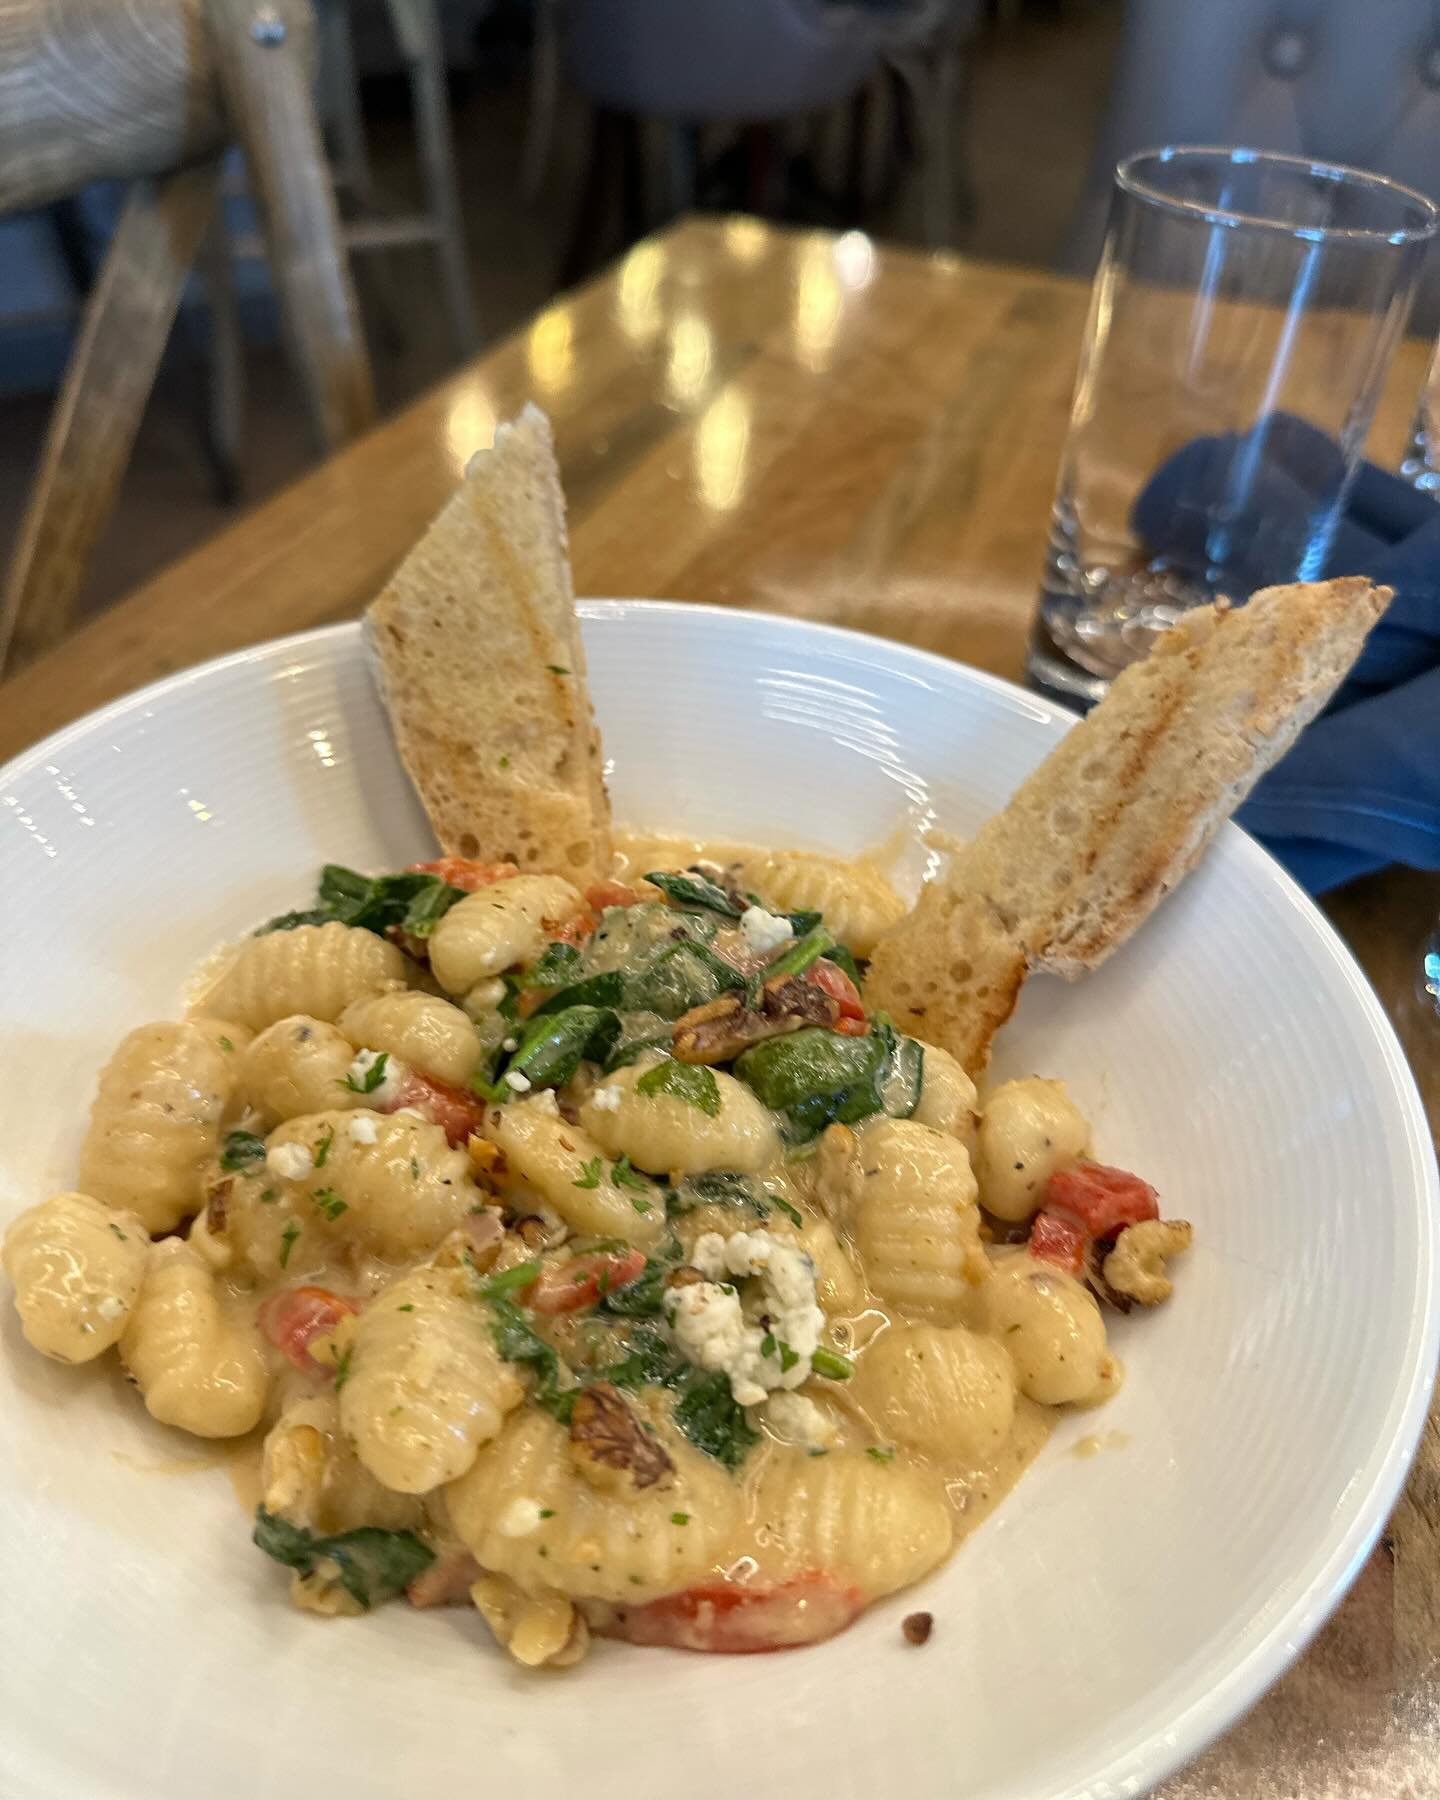 Weekend Specials: 

Gorgonzola Gnocchi 
Roasted Red Pepper | Spinach | Toasted Walnuts | Creamy Gorgonzola Sauce | Pears | Garlic Bread 

Empanada Criolla 
Traditional Argentine Baked Pastry Stuffed with Meat &amp; Spices and Saved with Chimichurri A